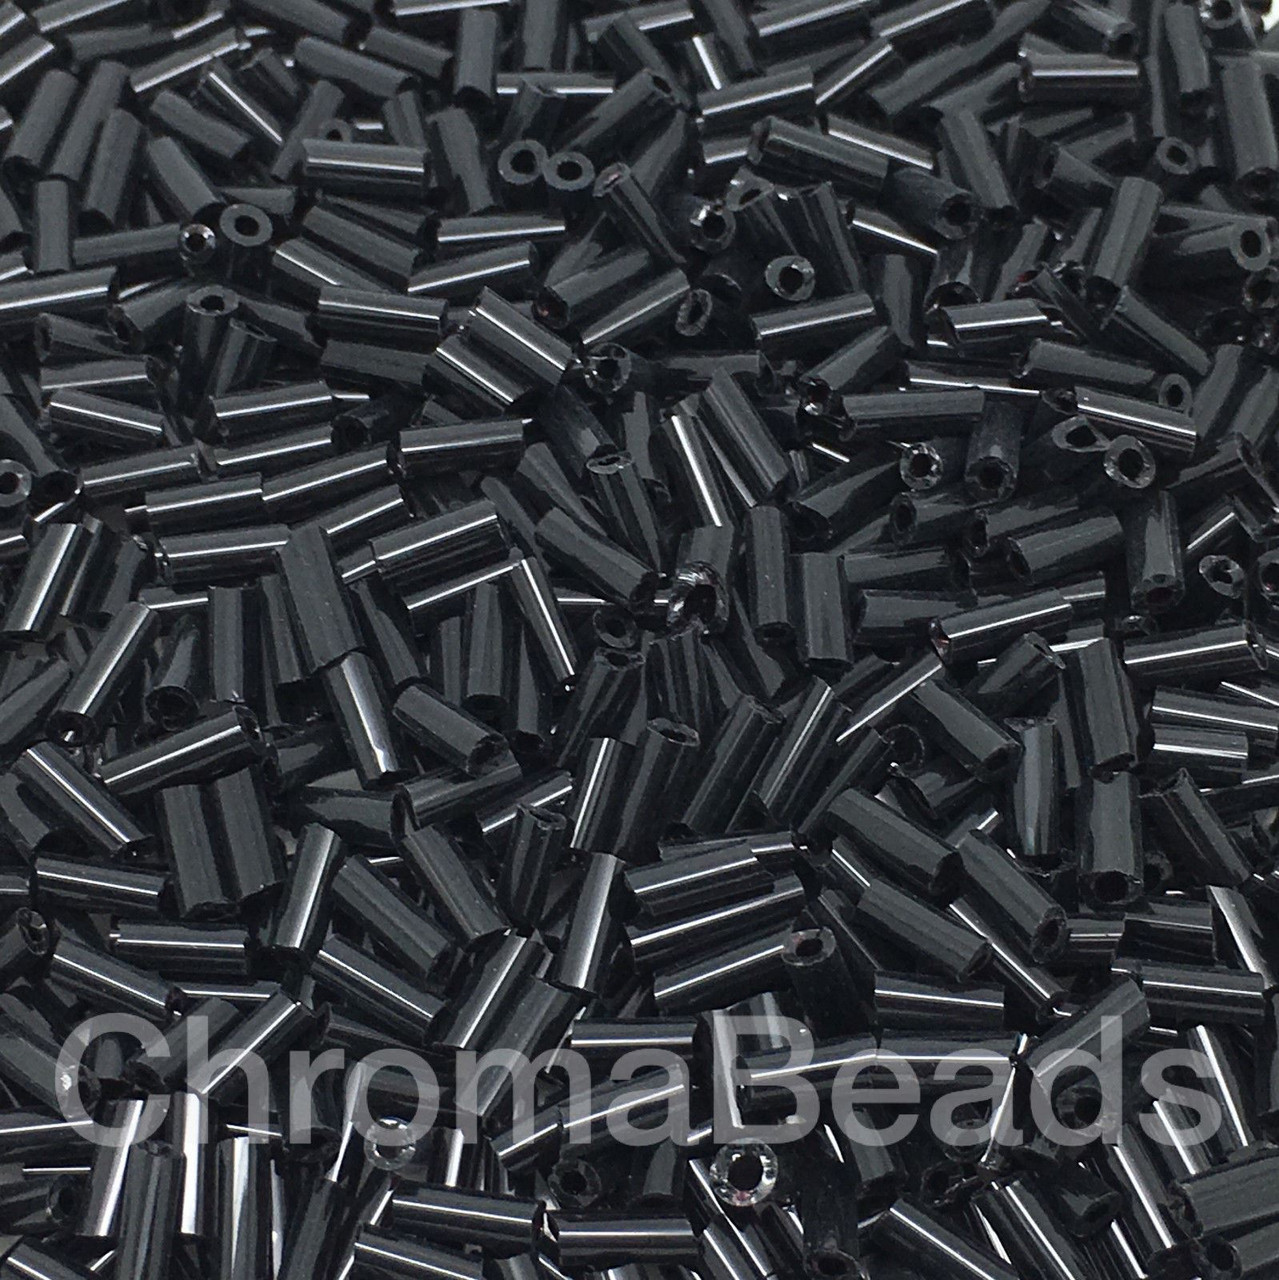 50g glass bugle beads - Black Opaque - approx 4mm tubes